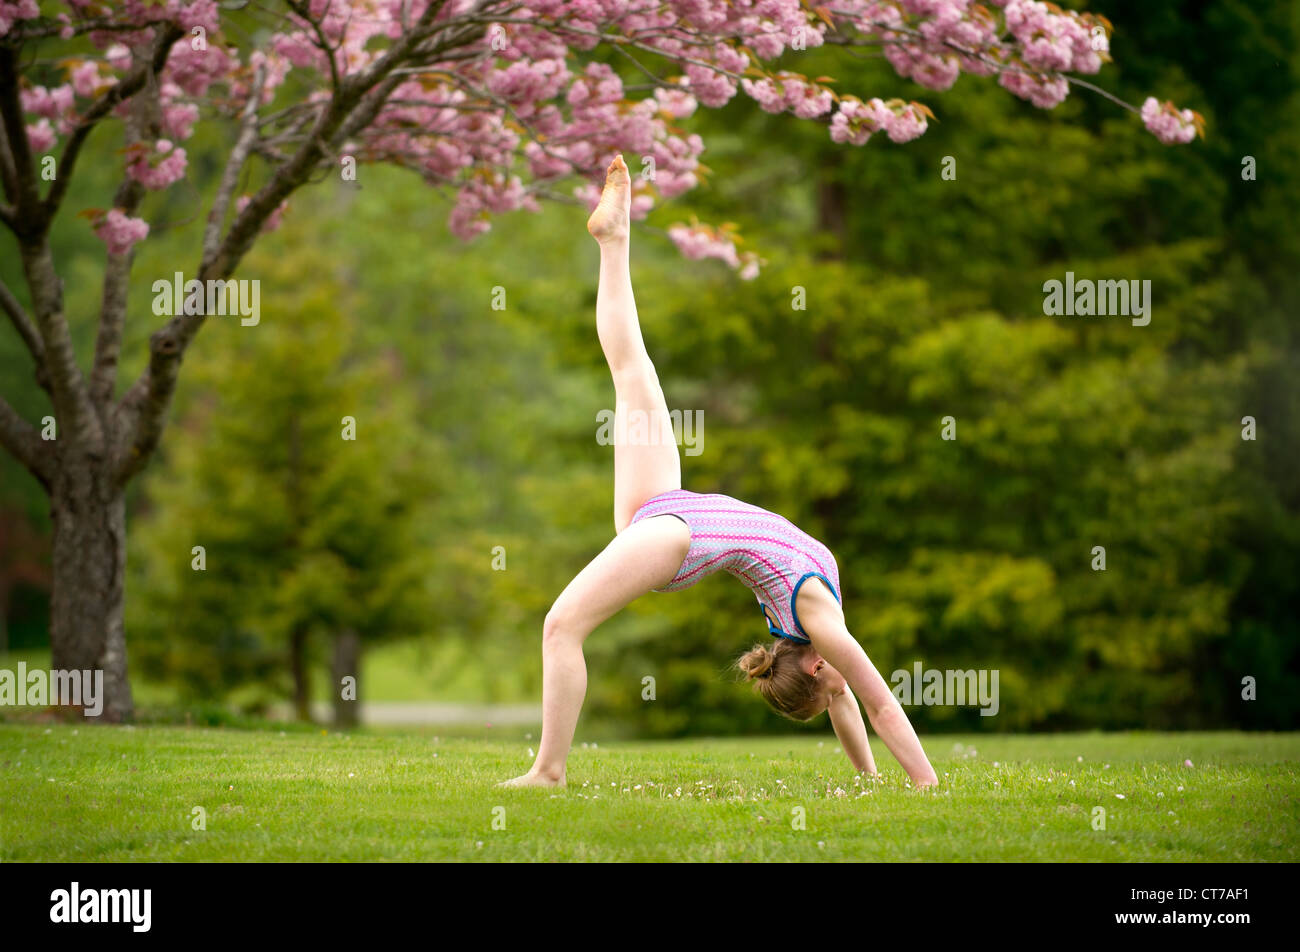 Gymnast performing in park Stock Photo